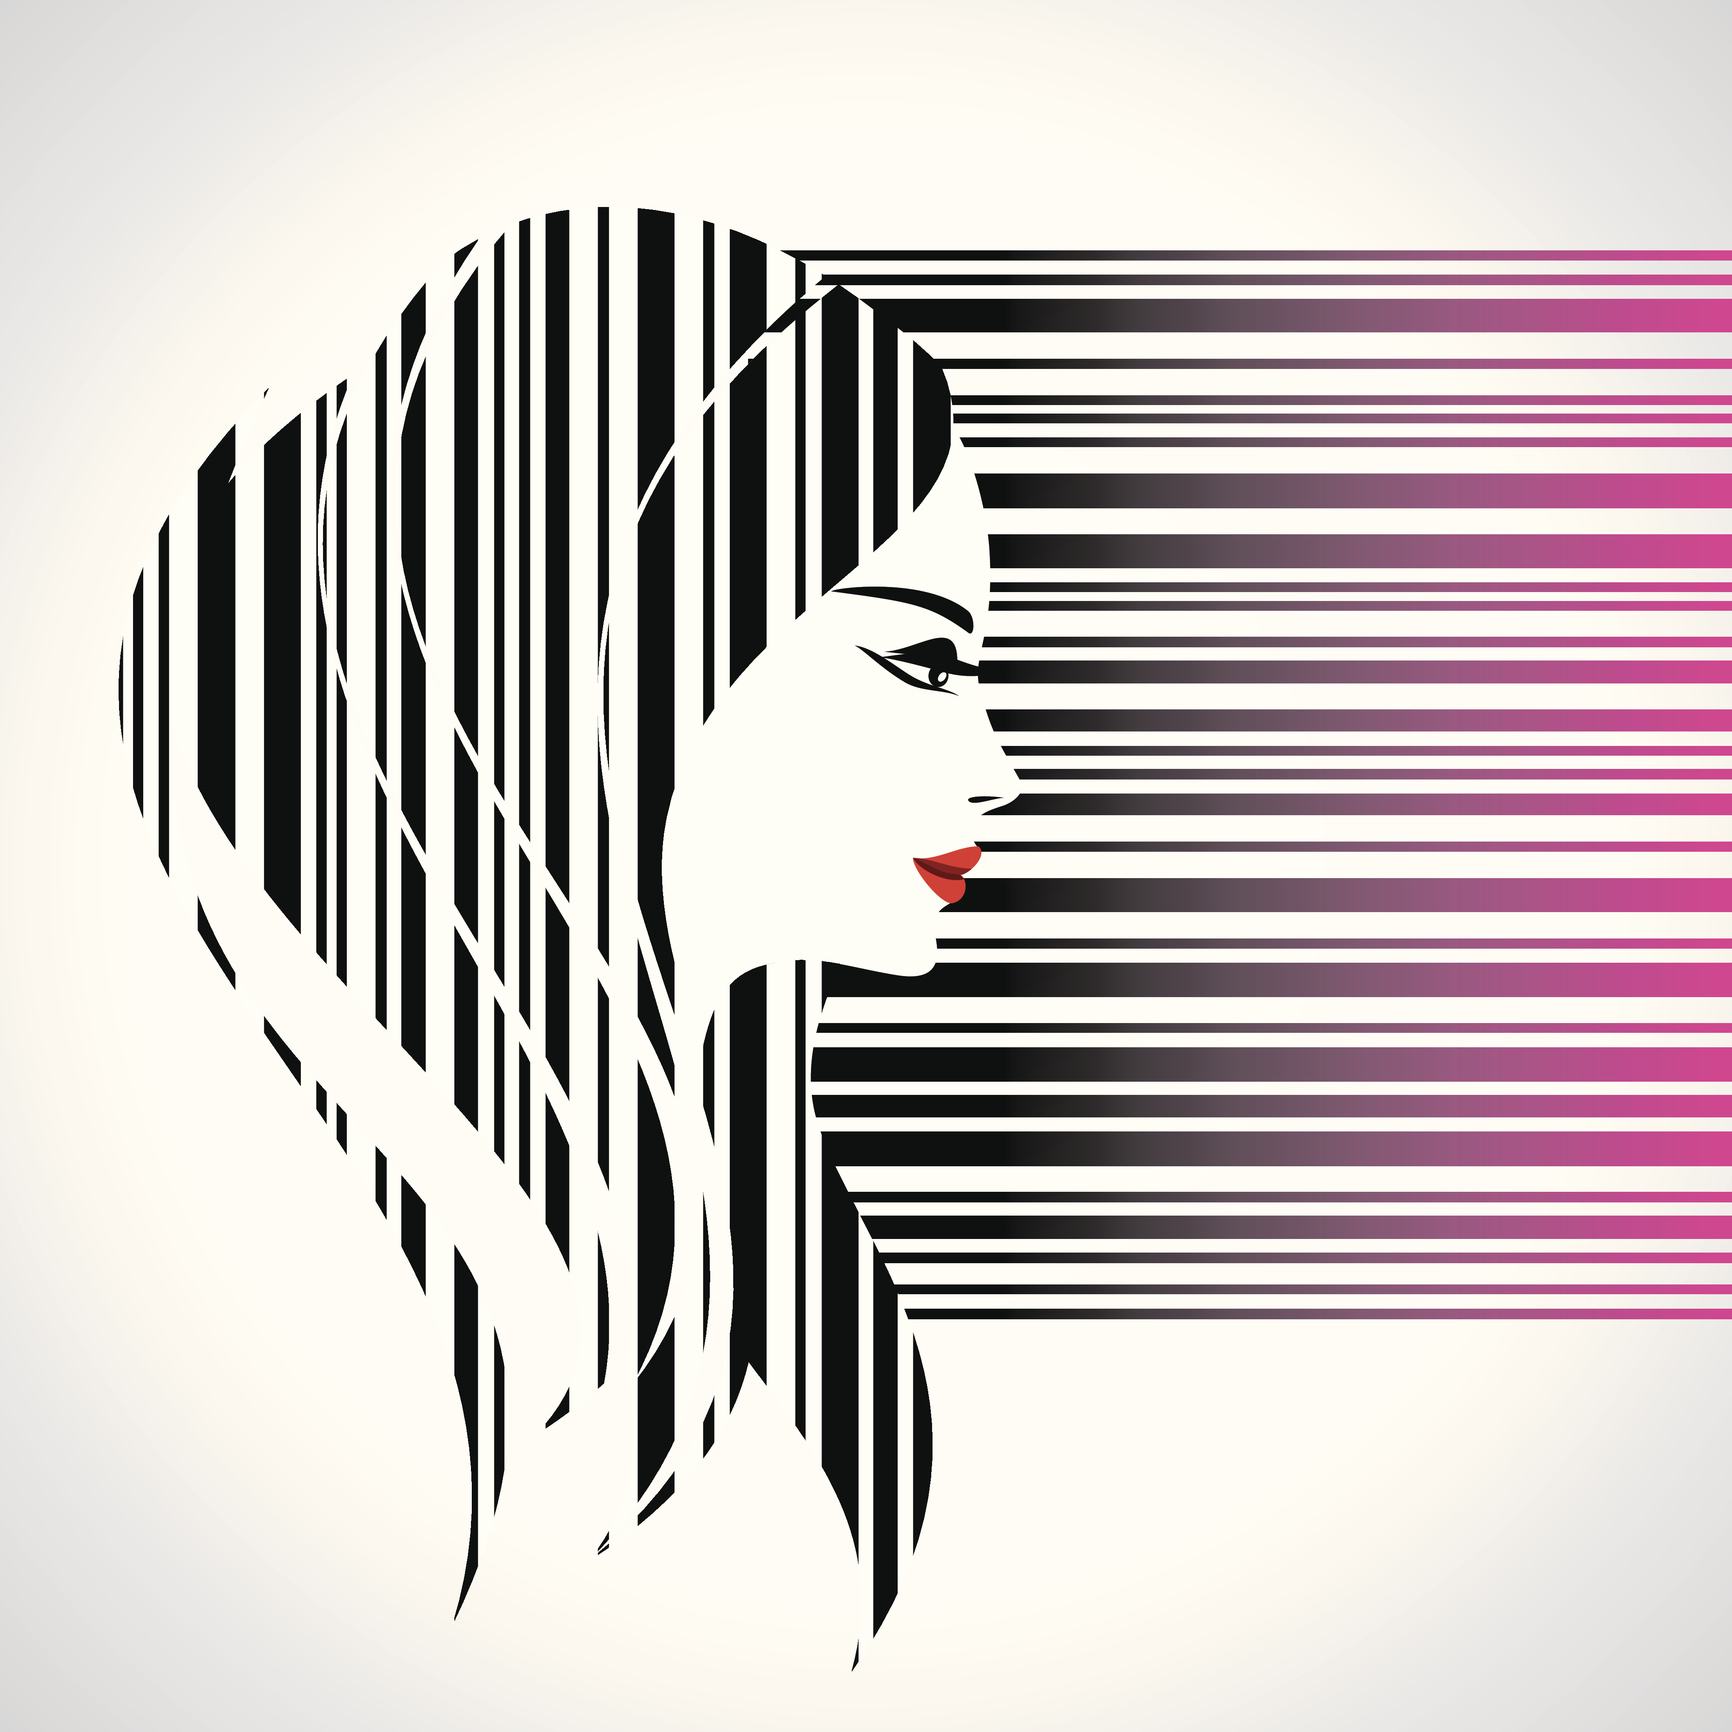 An illustration of a woman, who also flows into a barcode concept.